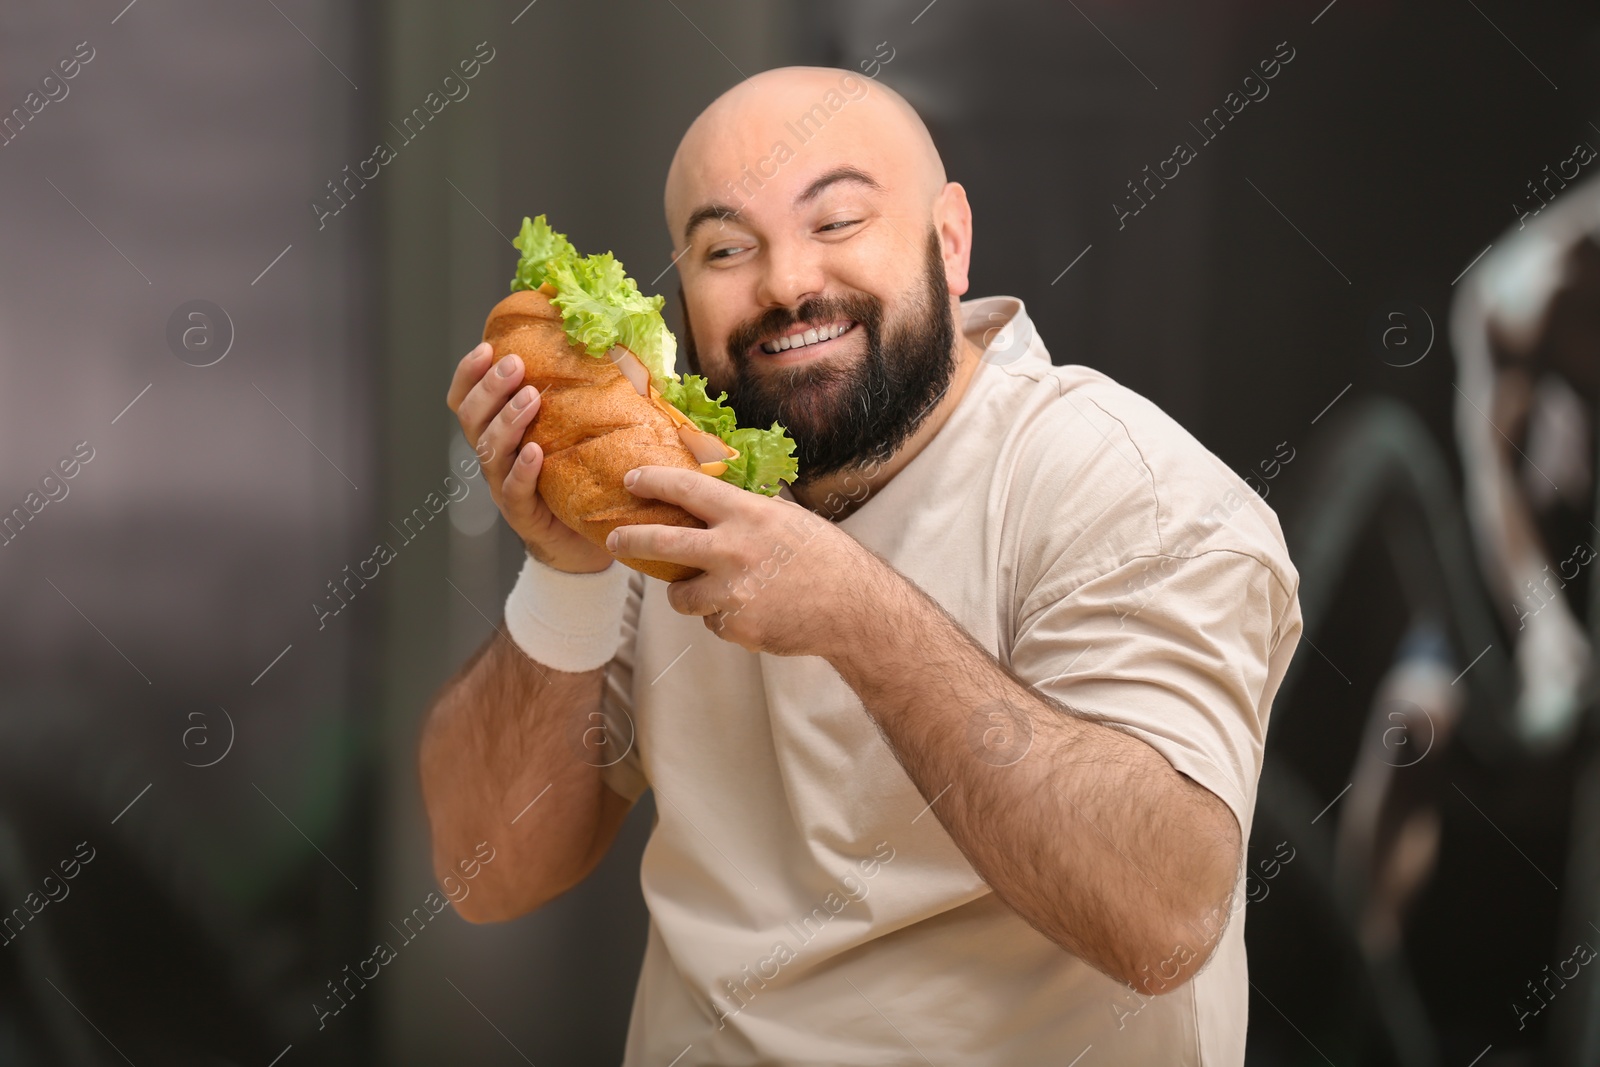 Photo of Overweight man eating sandwich in gym